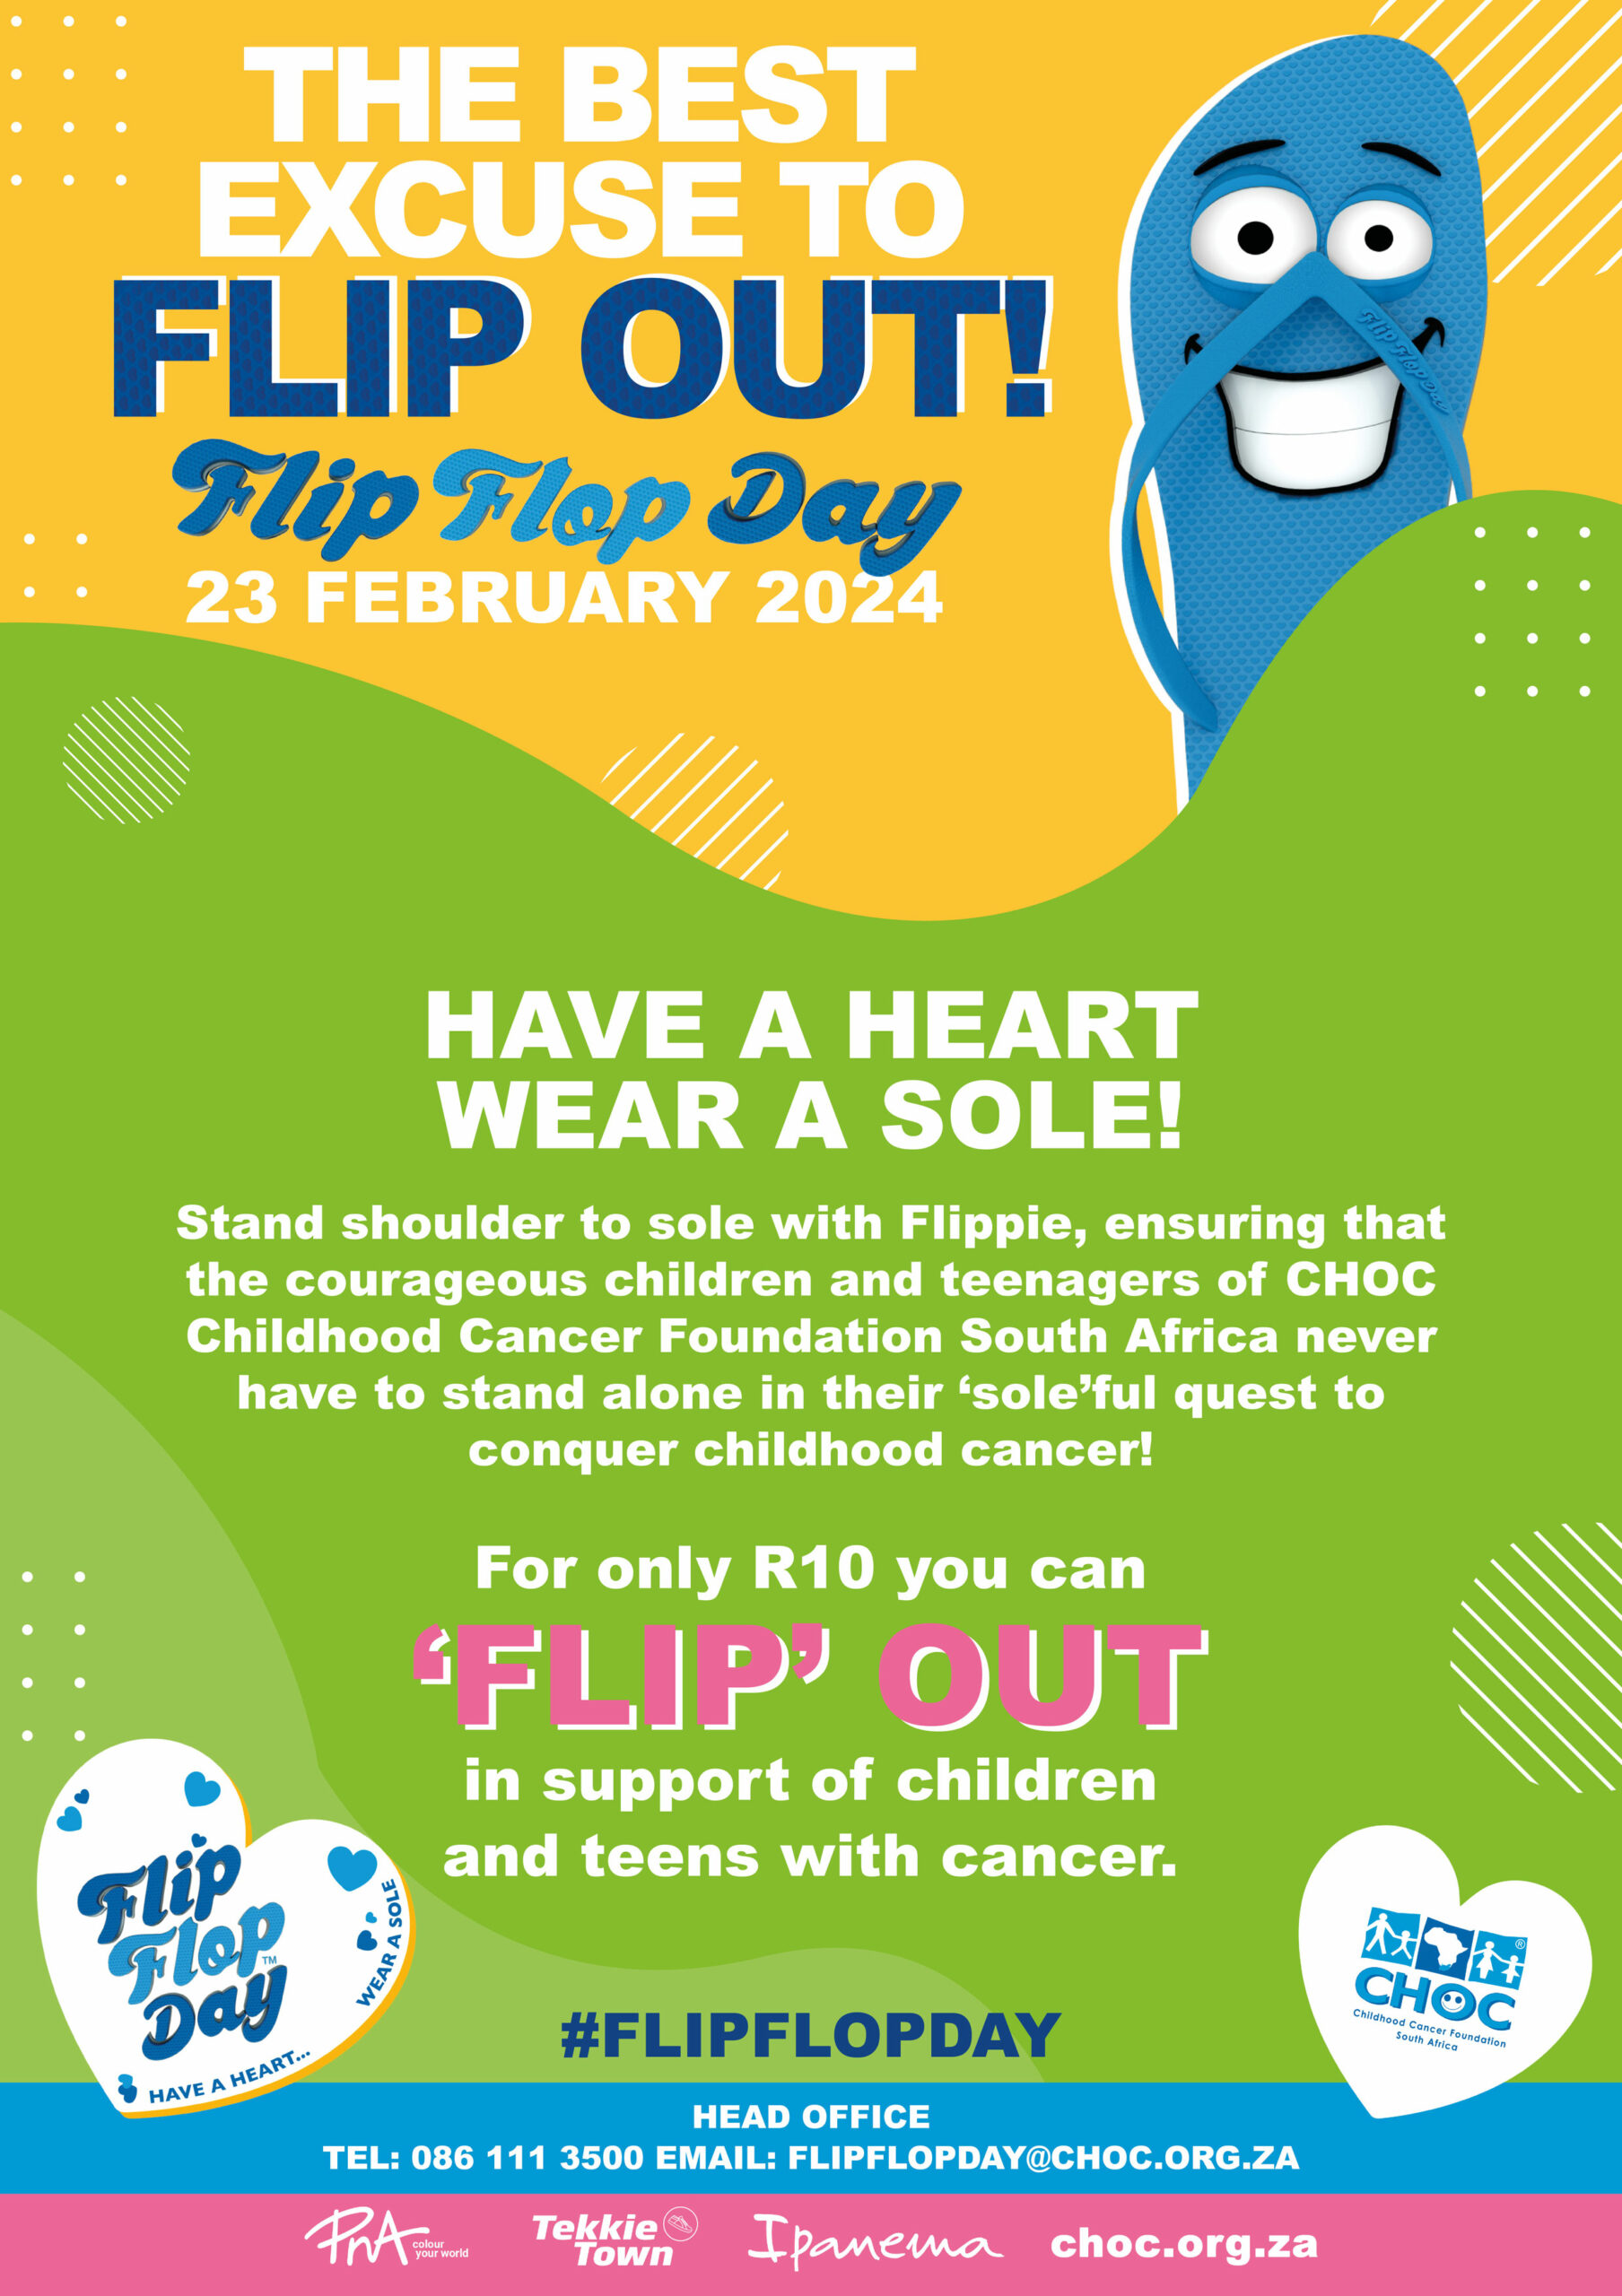 CELEBRATE WITH FLIP FLOP DAY WITH CHOC CHILDHOOD CANCER FOUNDATION SA